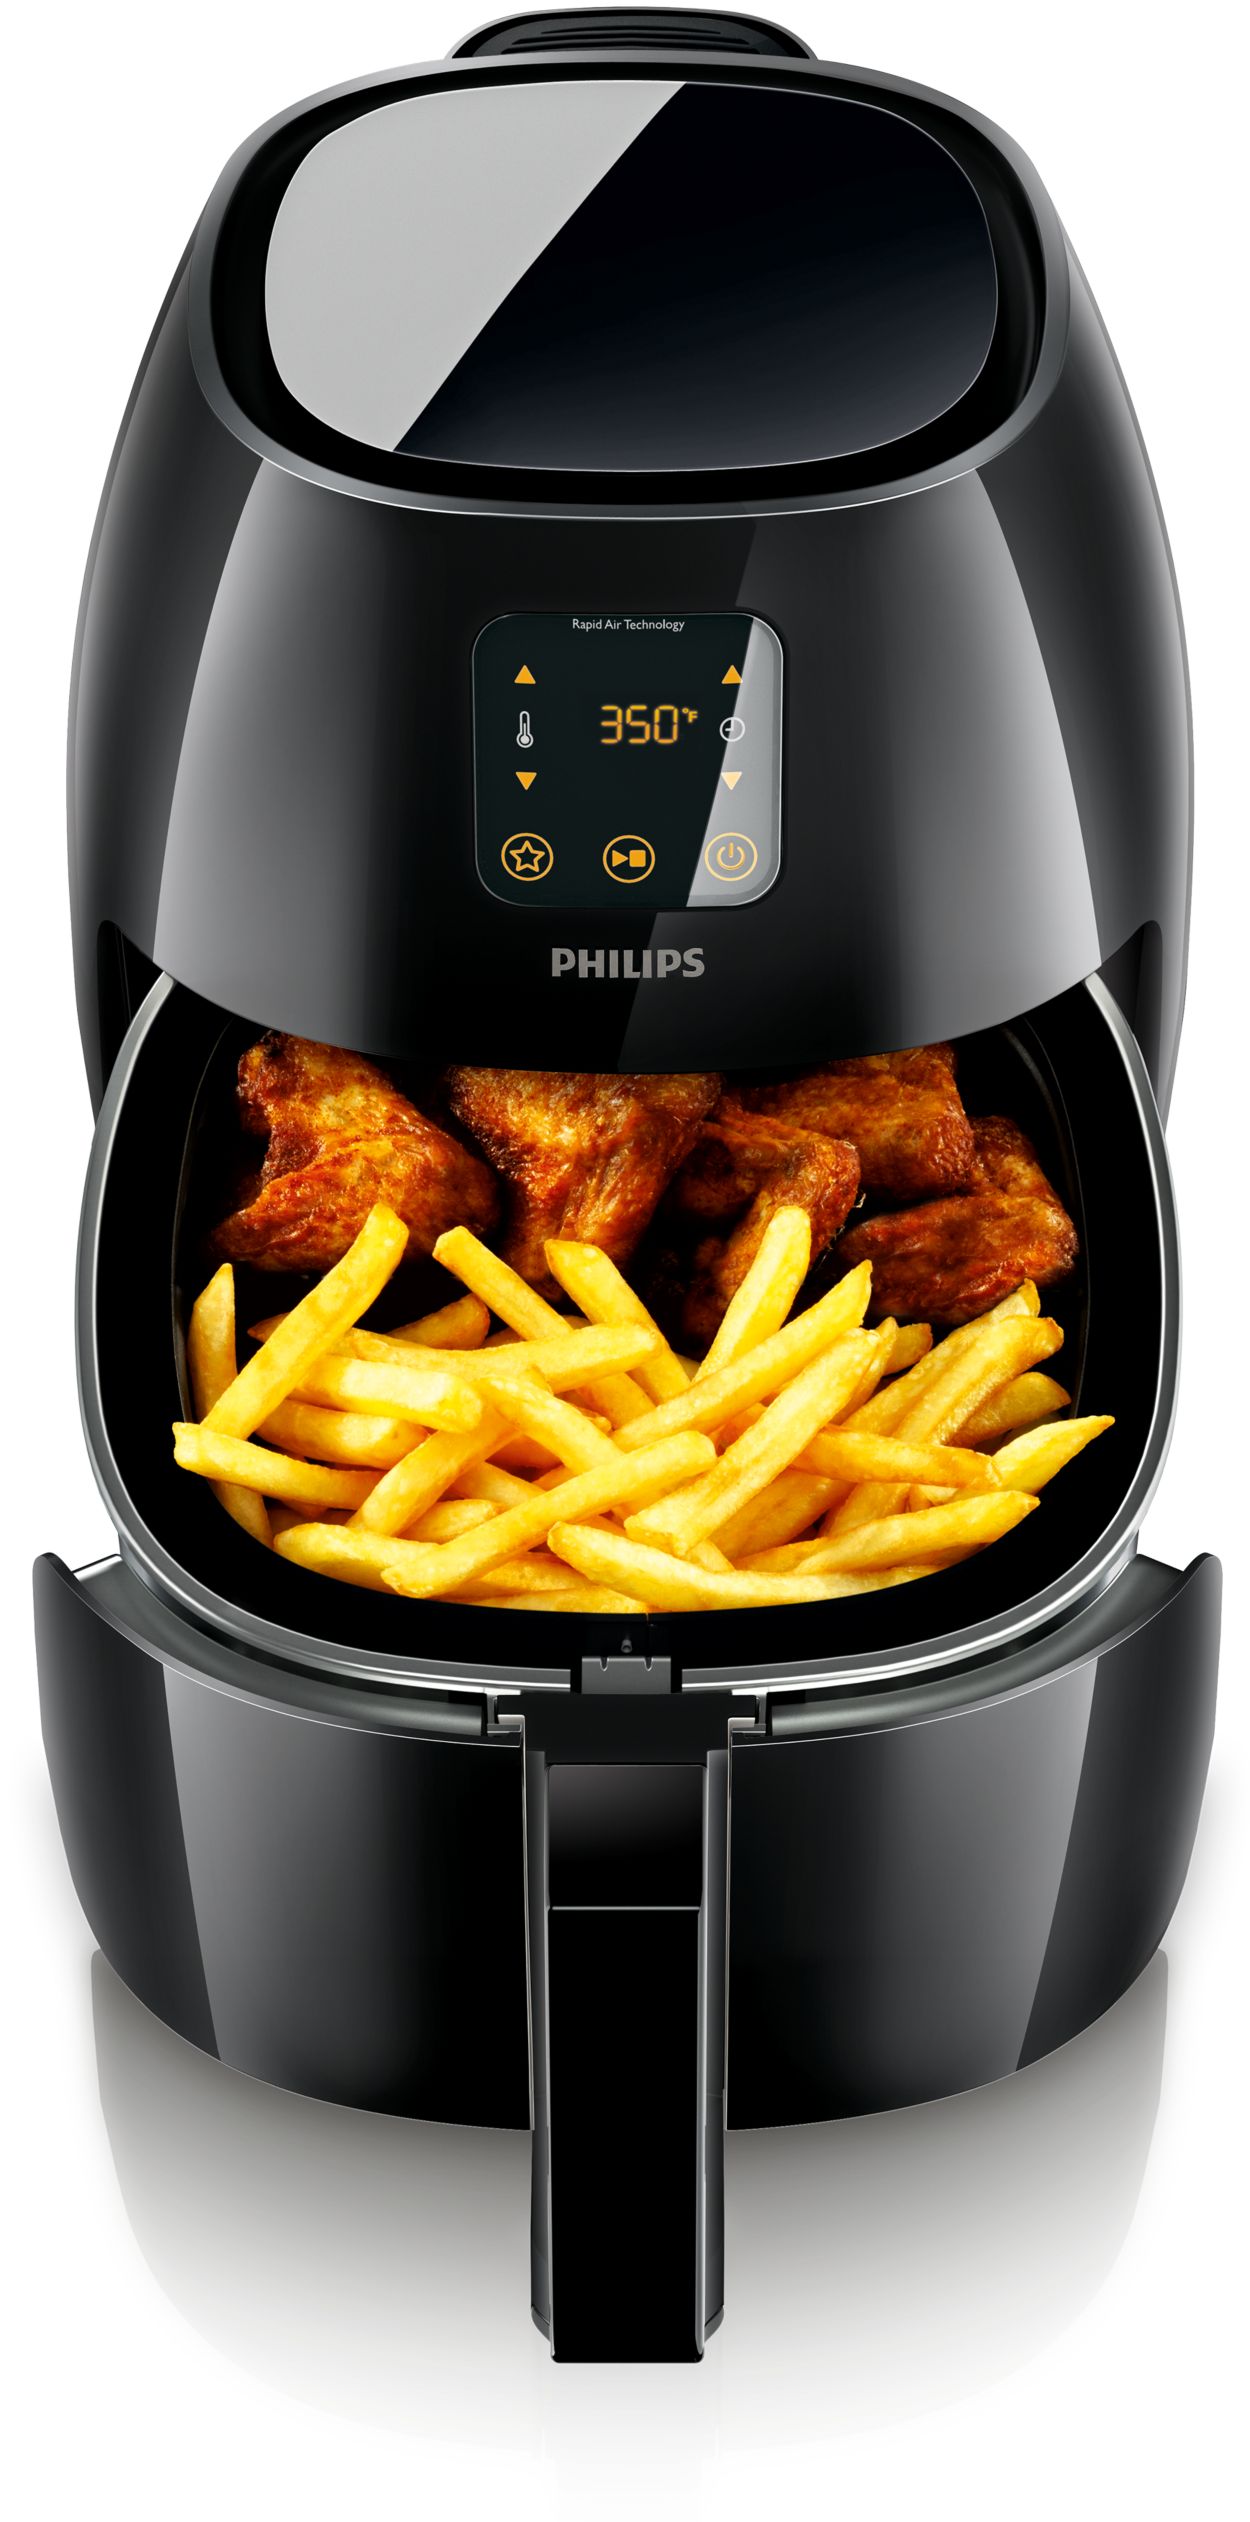 Philips Airfryer XL HD9270 - Enjoy XL capacity with Rapid Air Technology 